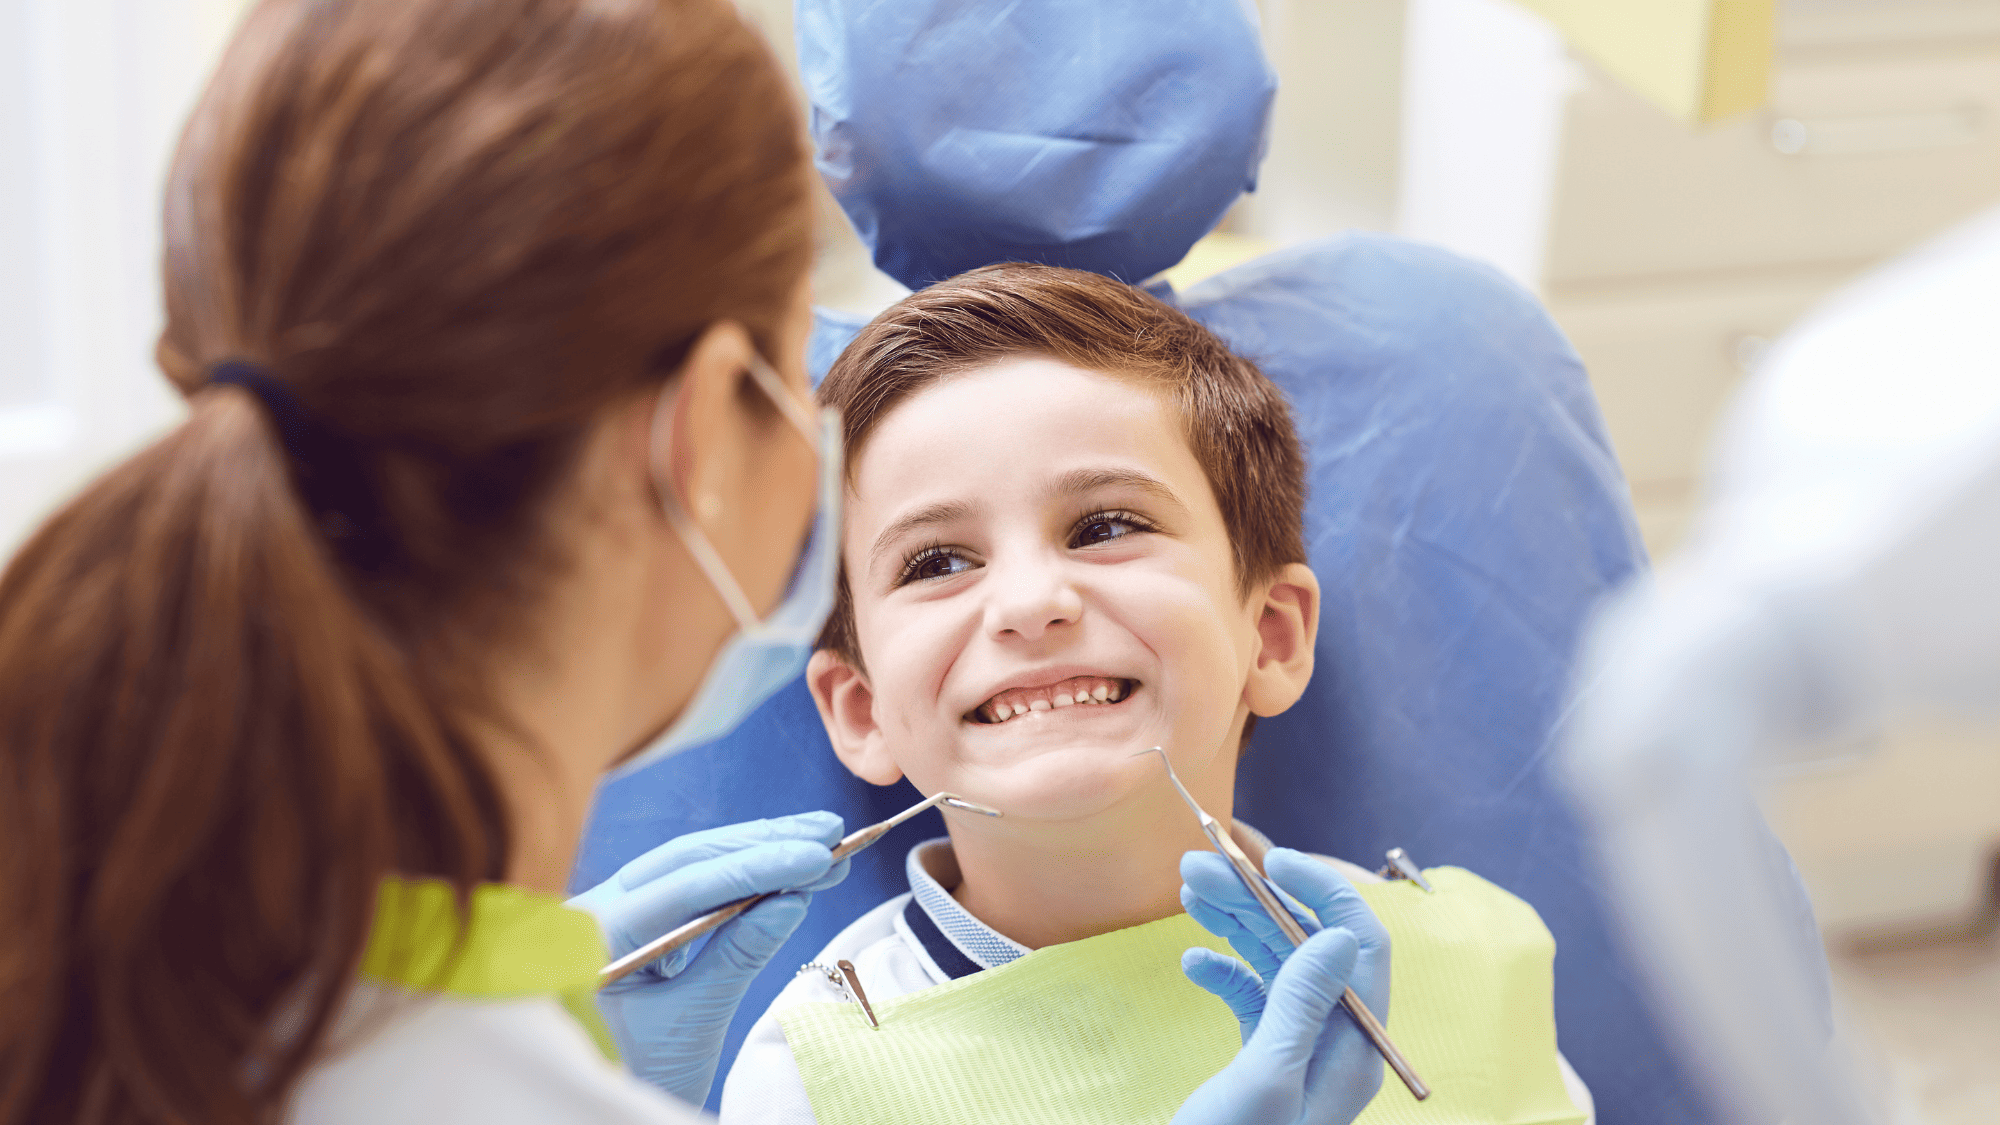 Young boy happy to be visiting the dentist to have his teeth checked